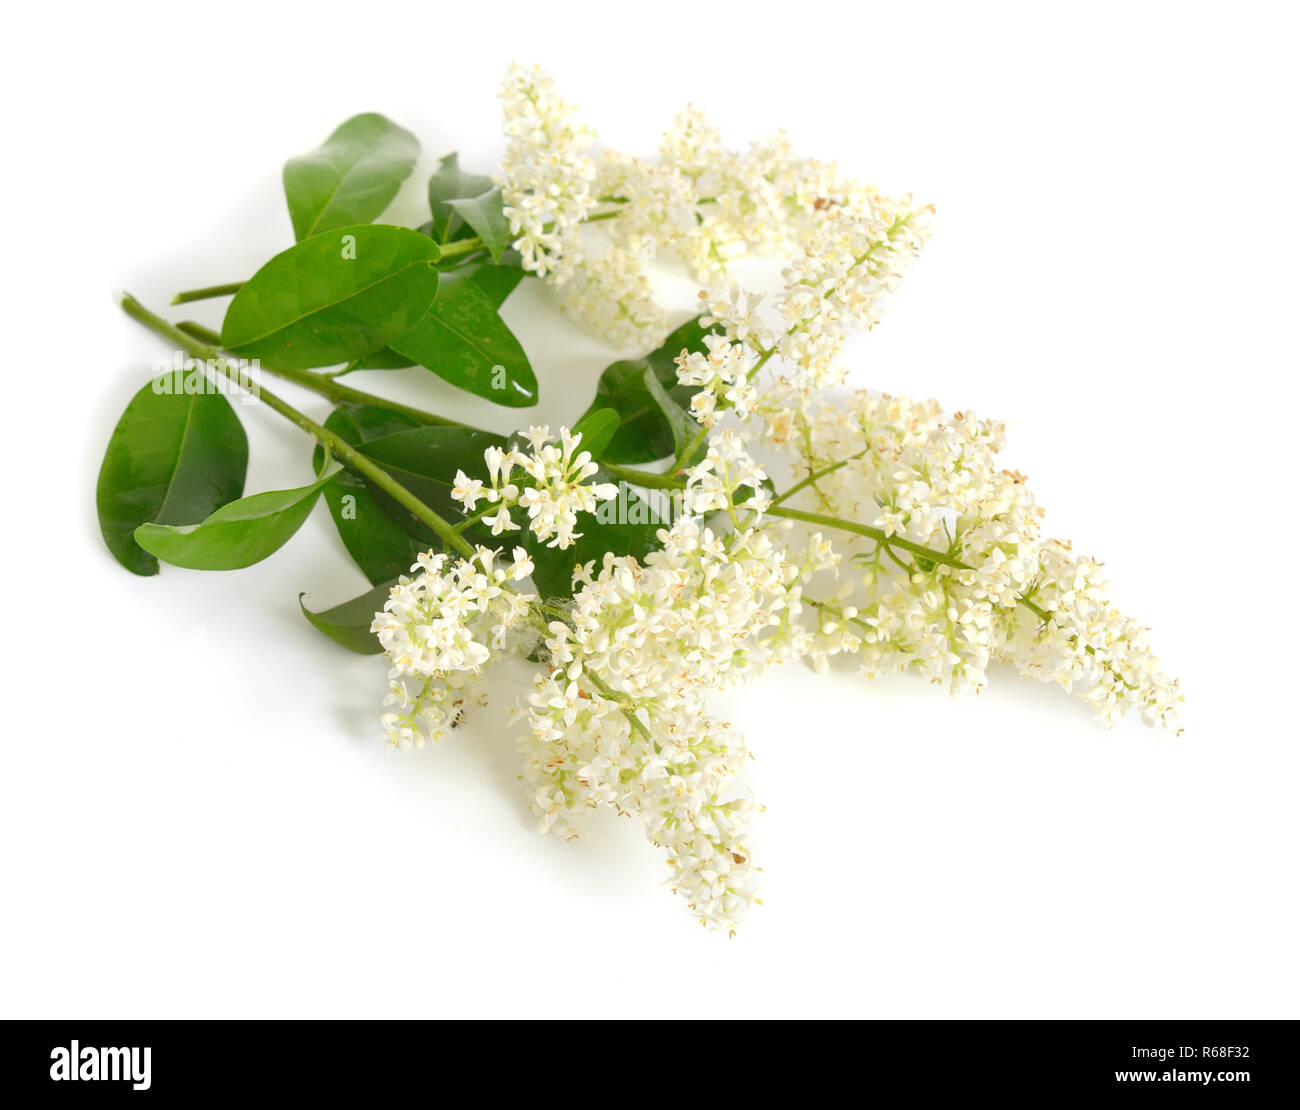 Privet Plant with flowers. Isolated on white background. Stock Photo